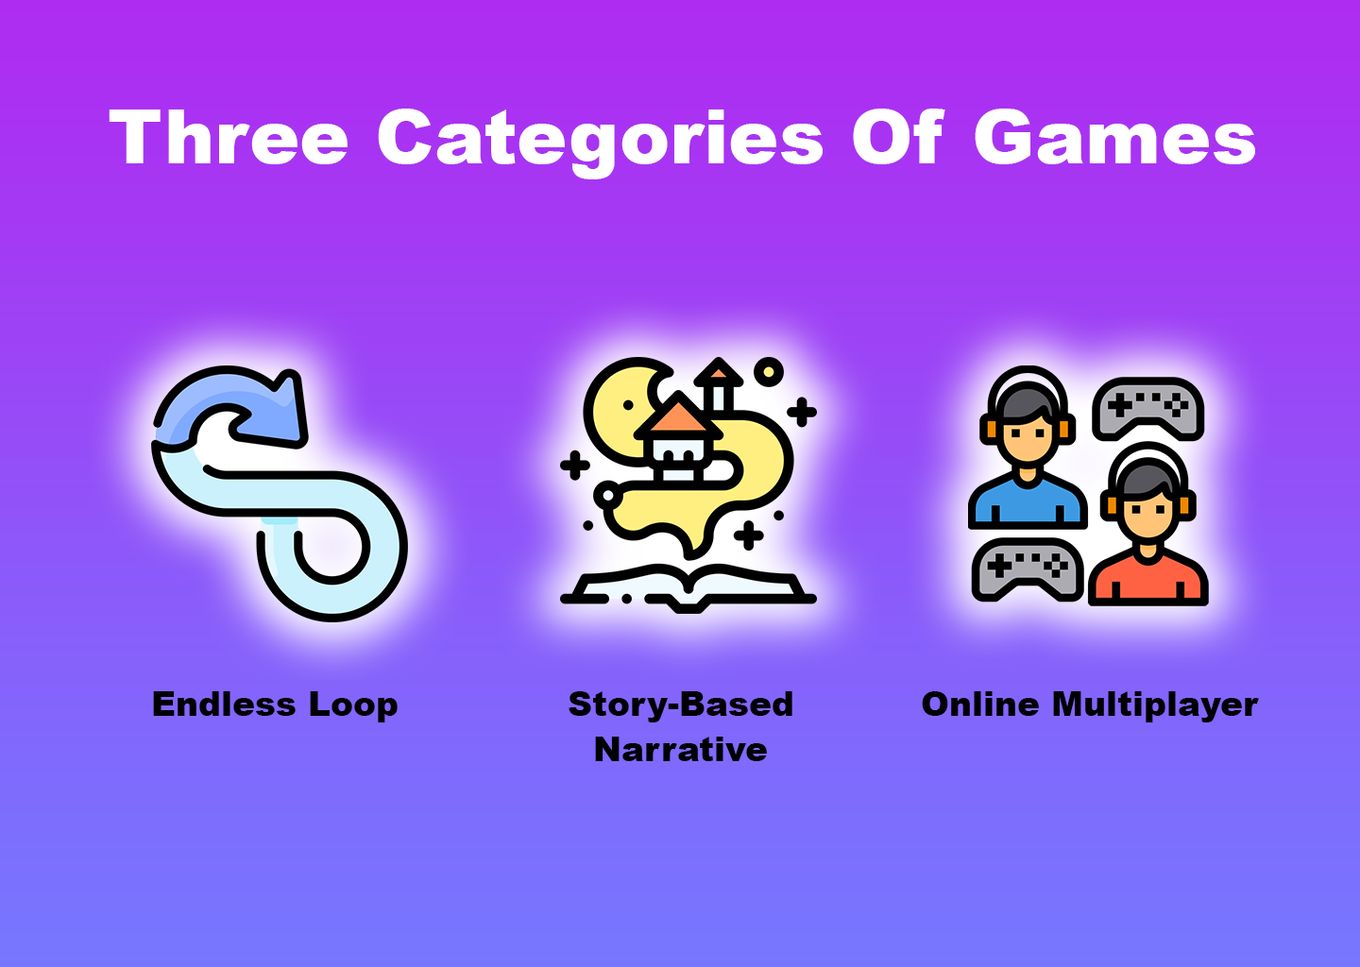 iPhone Games are divided into three categories